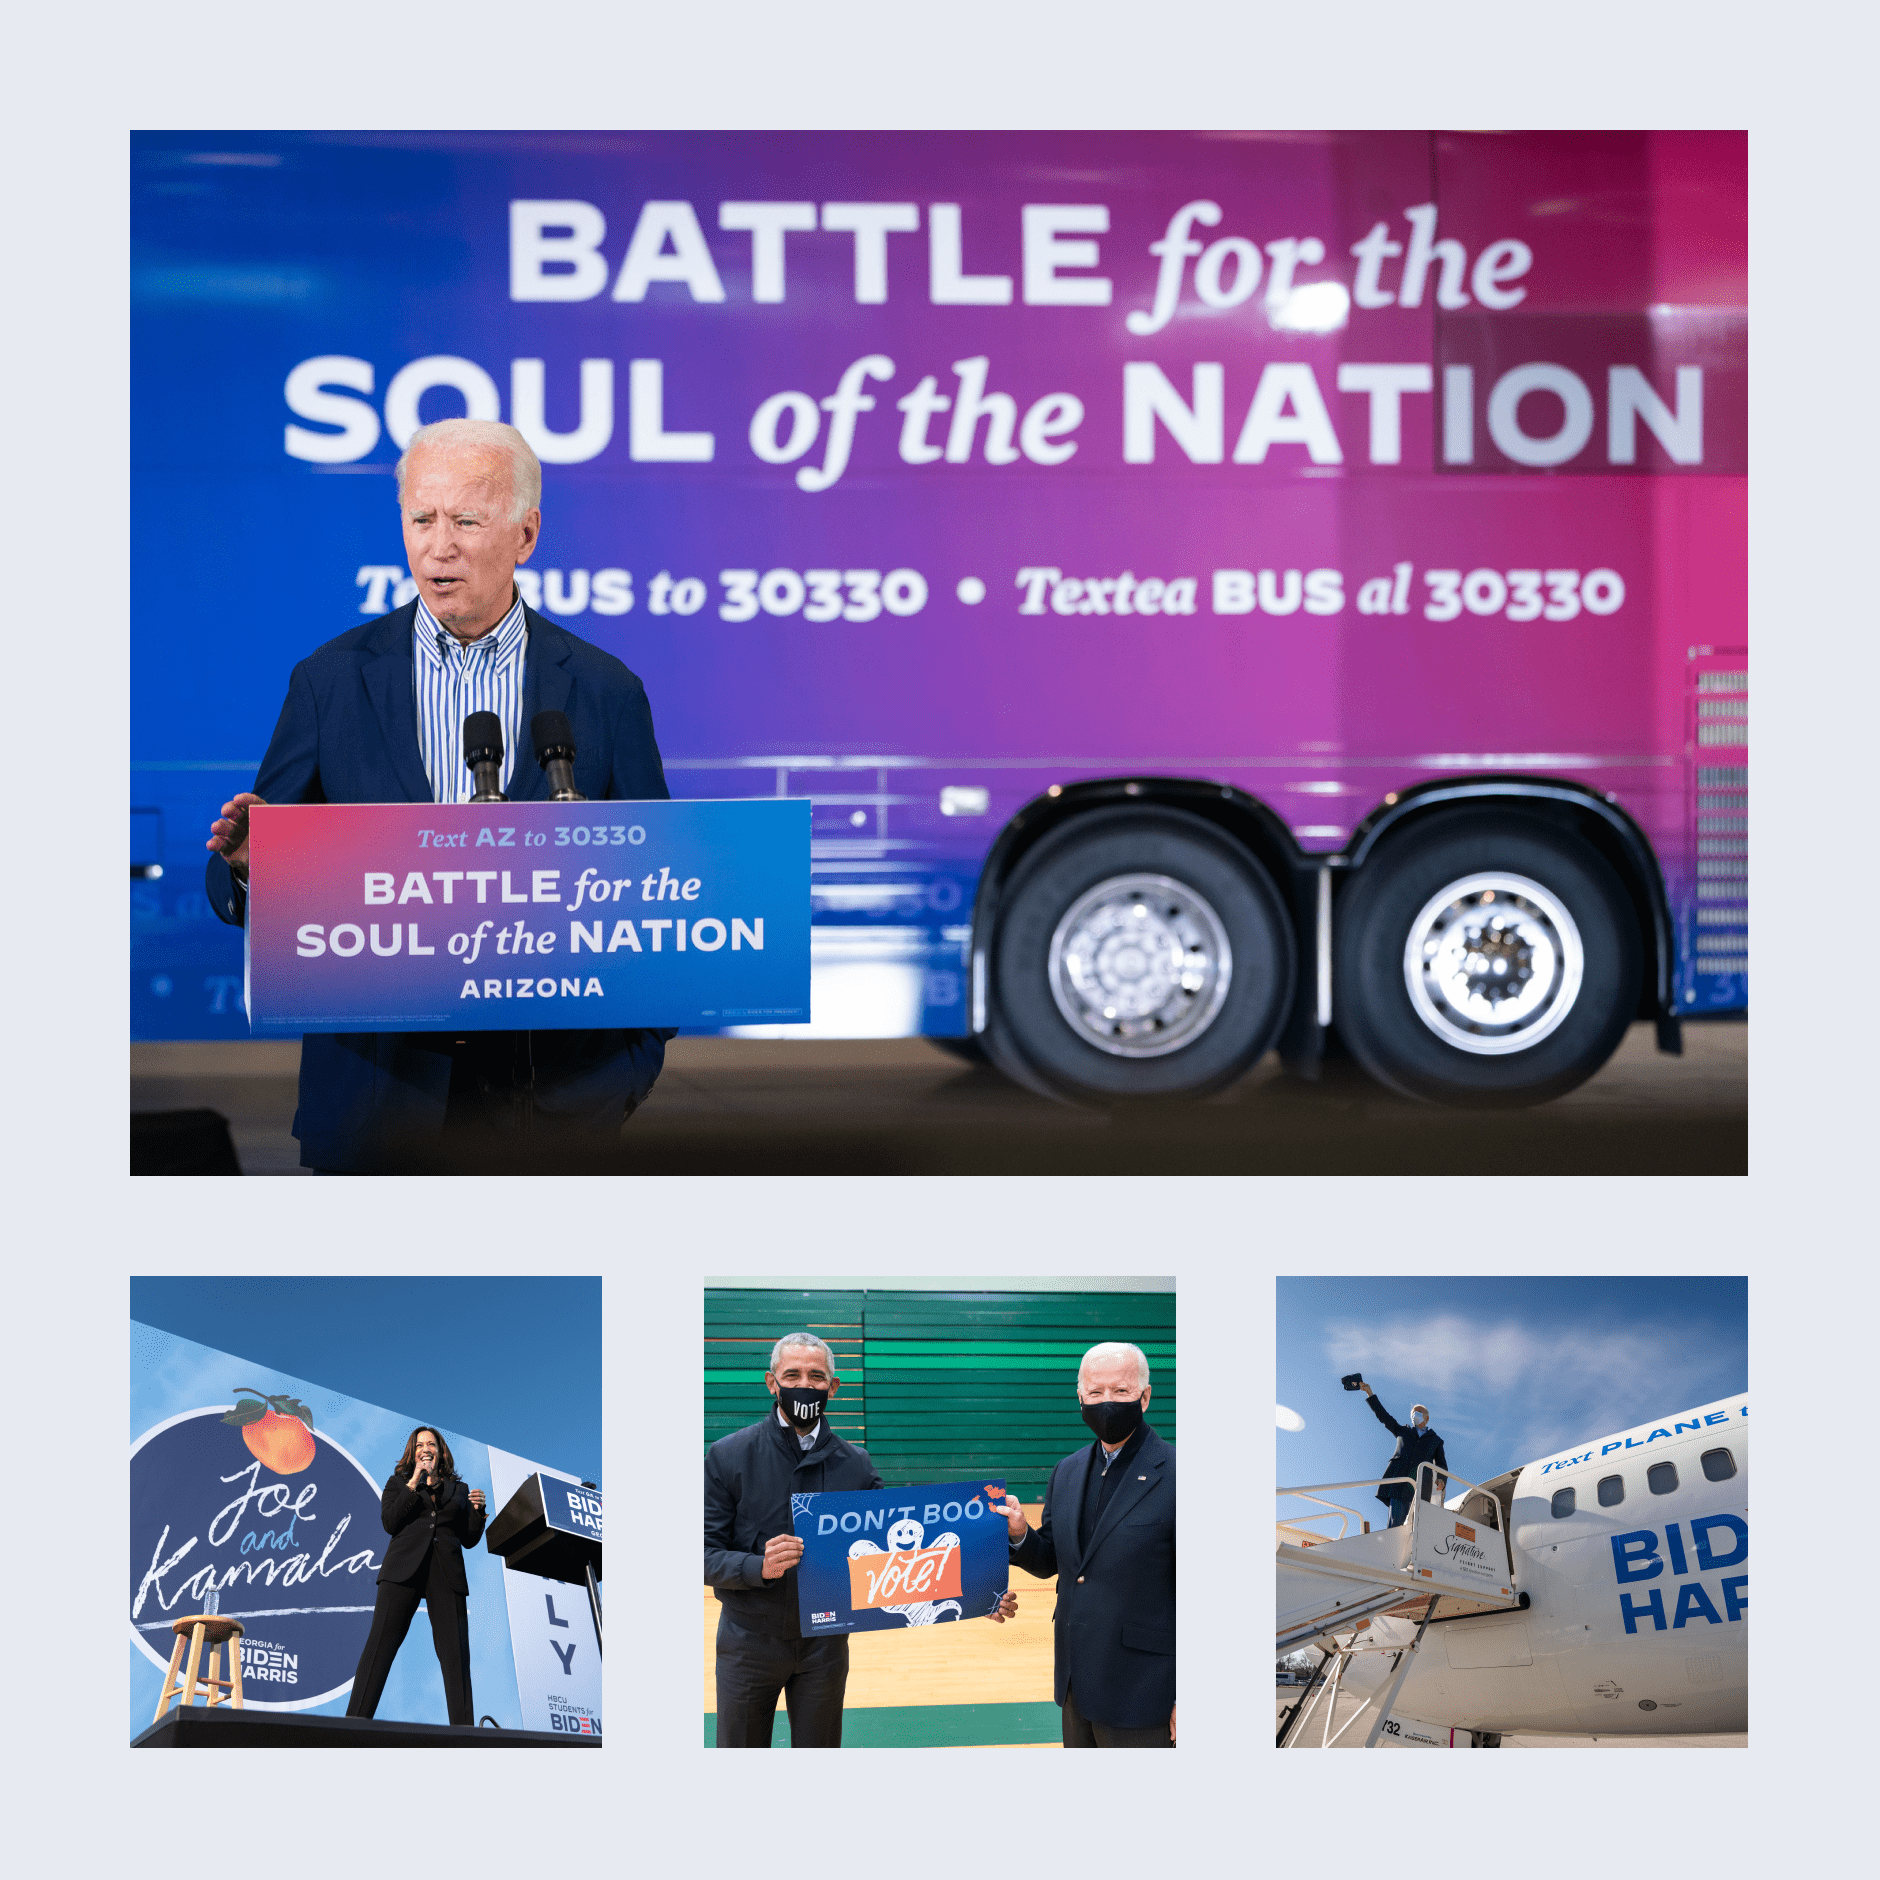 Series of photos showing branding in various places. On a bus, on a plane, and on a stage.